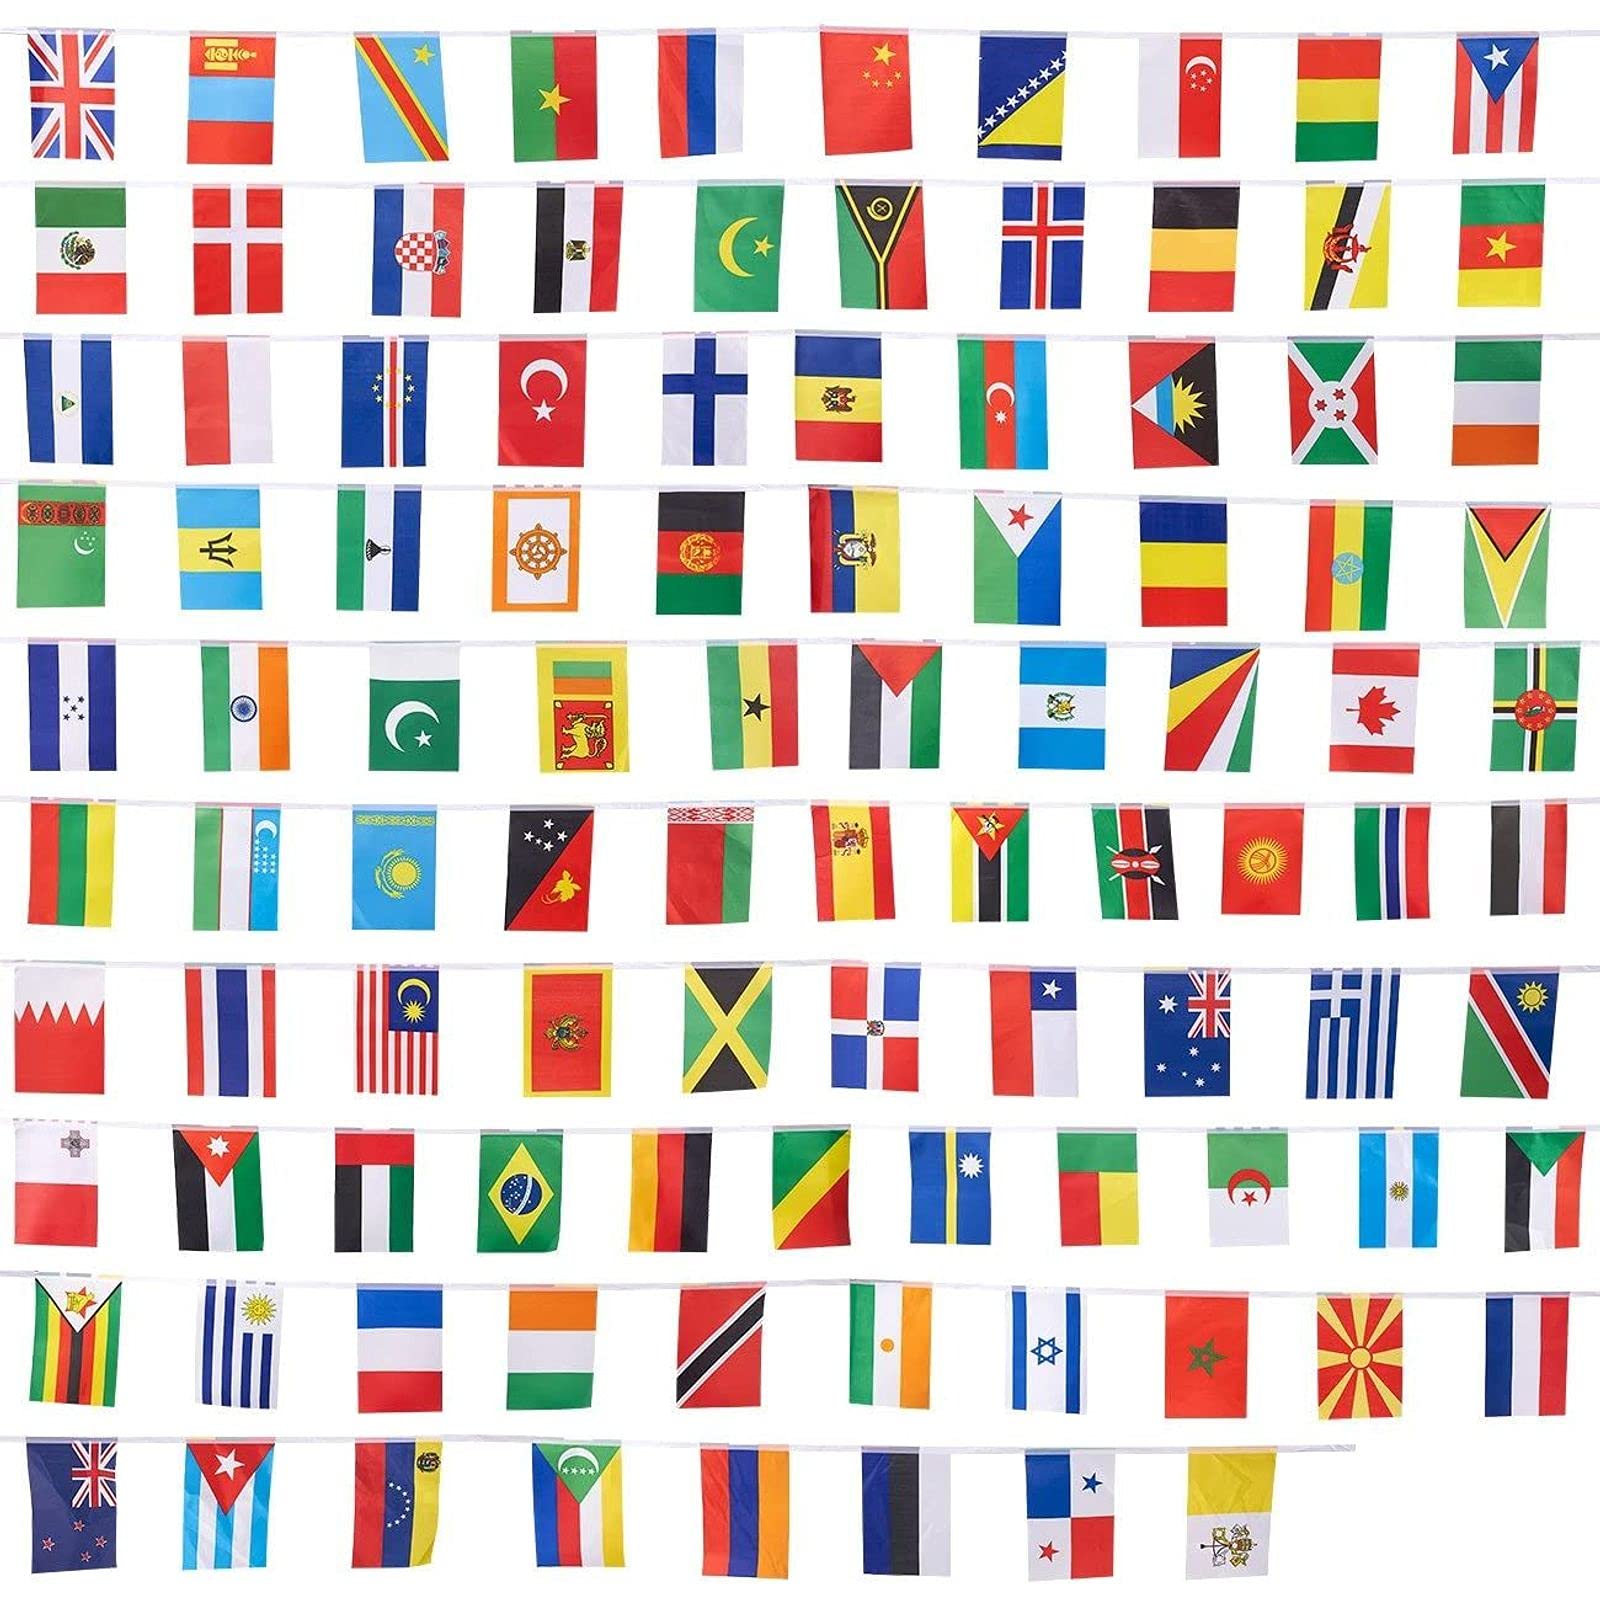 Online shopping website with different country flags for international options